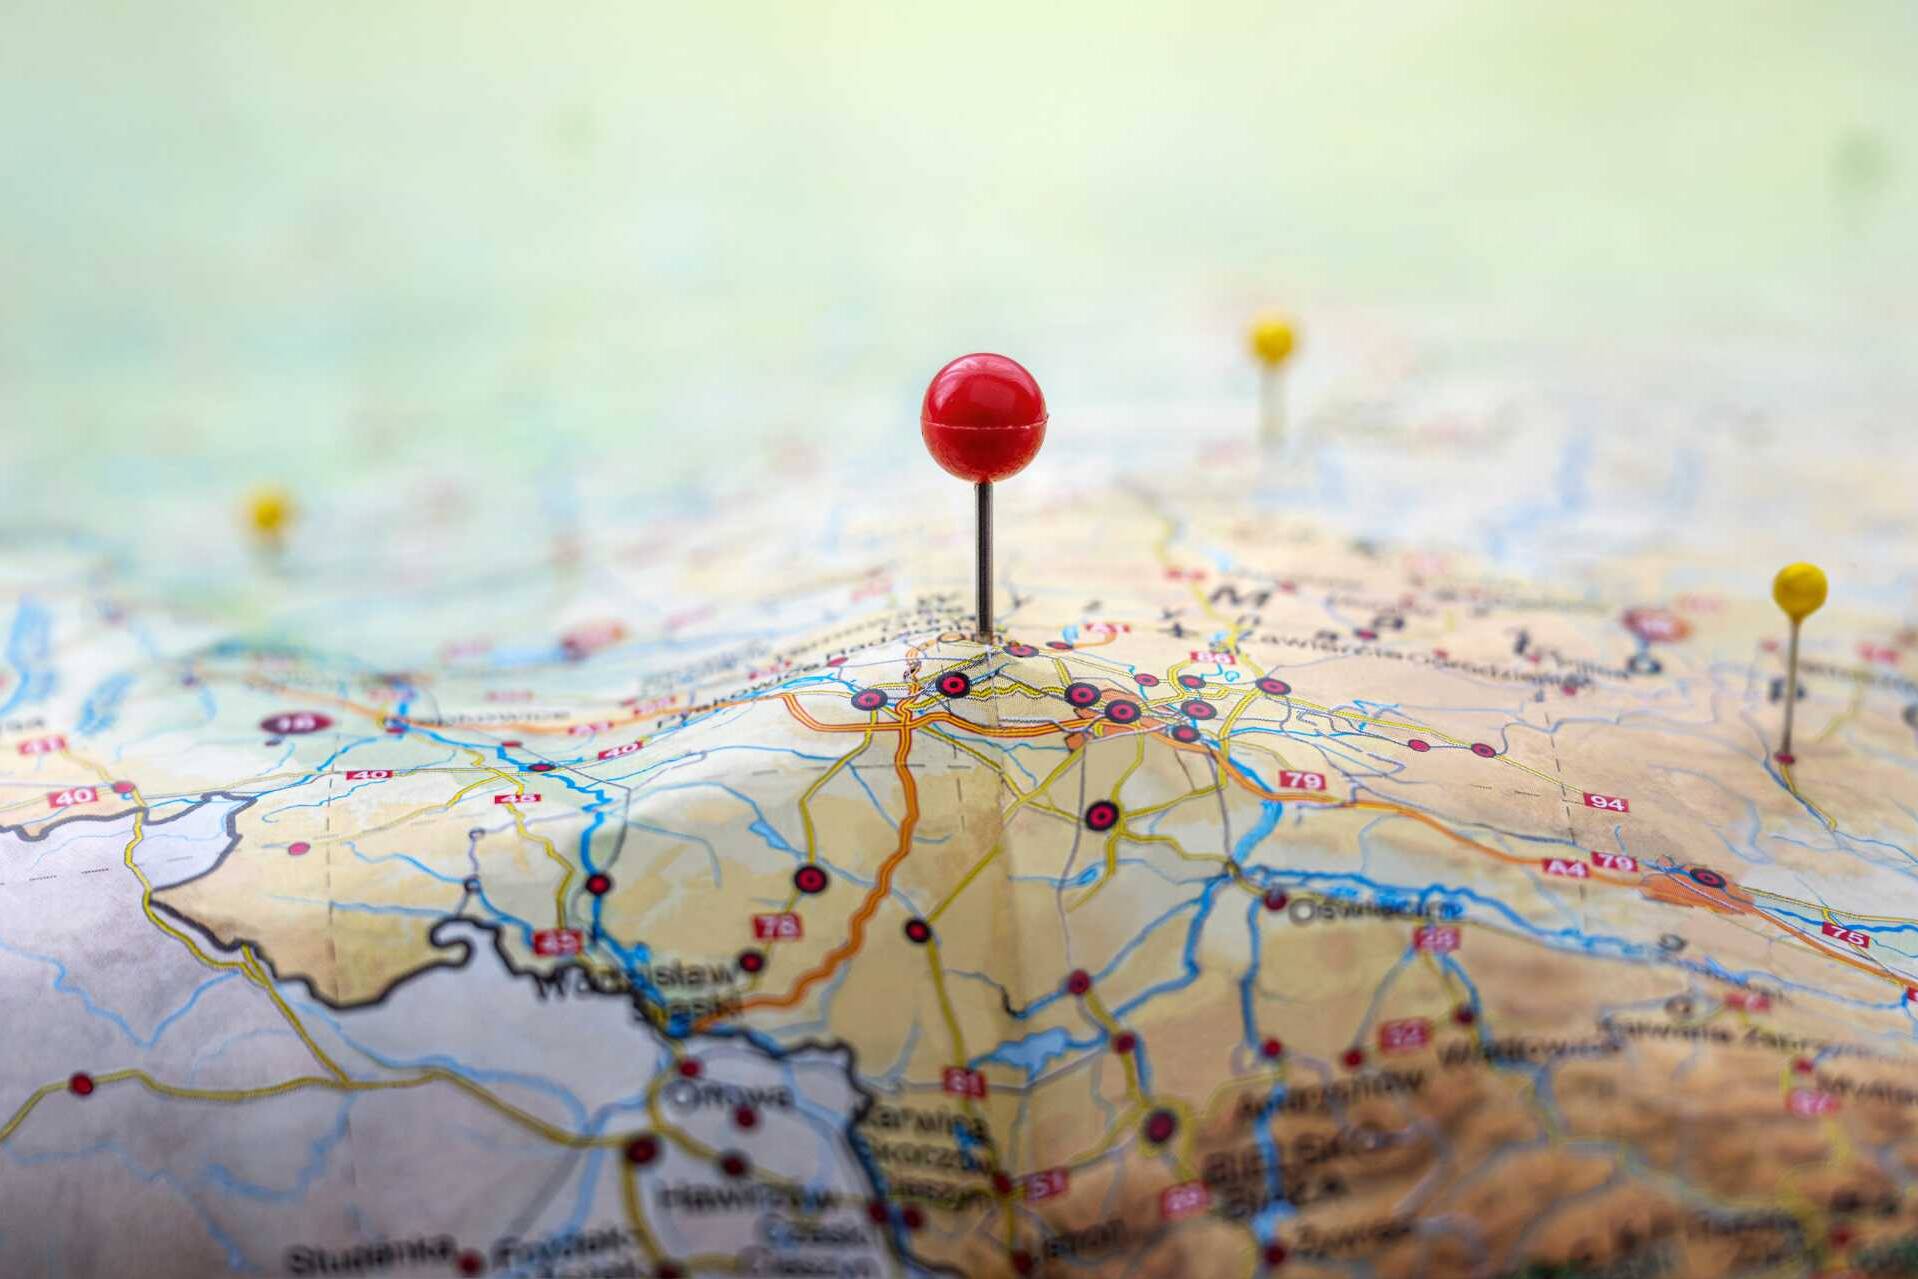 travel seo tips guide - featured map image